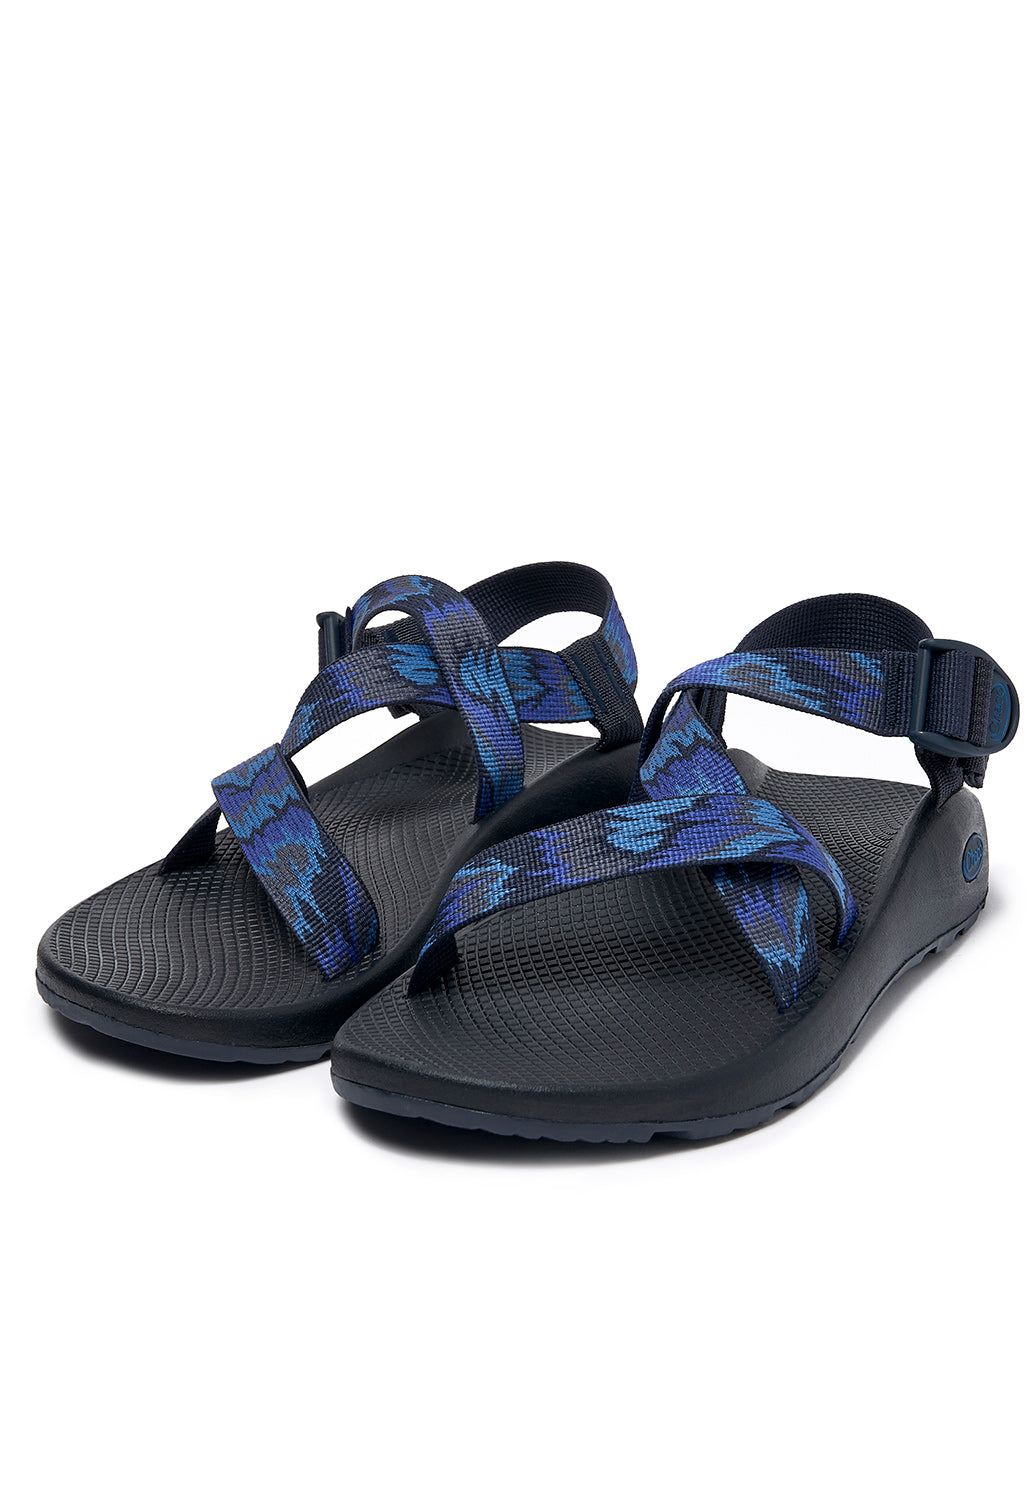 Chaco Men's Z1 Classic Sandals - Aerial Blue